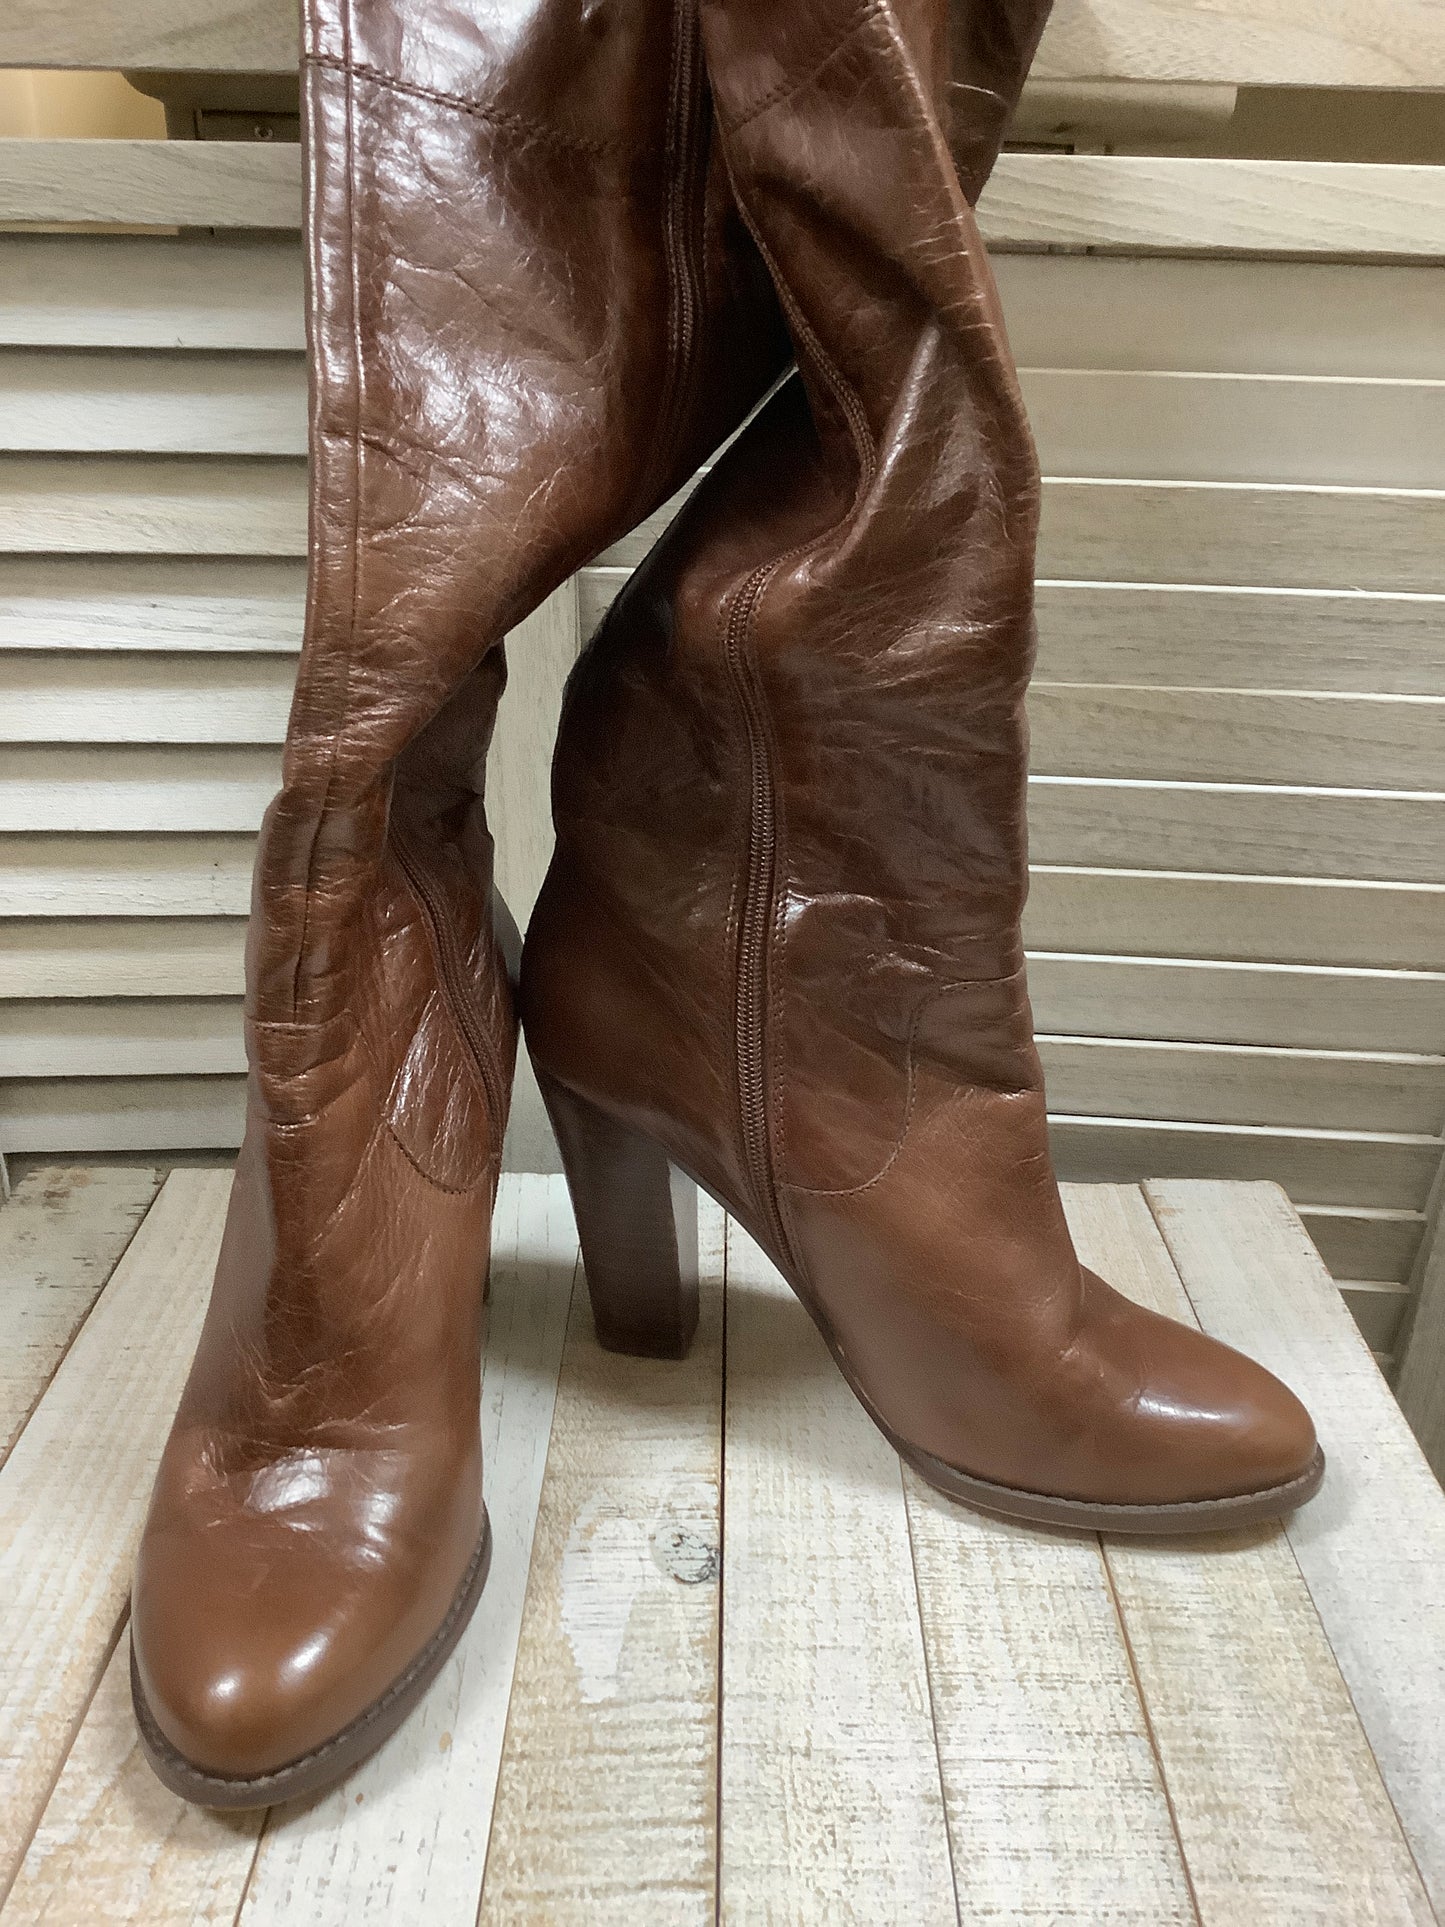 Boots Ankle Heels By Audrey Brooke  Size: 9